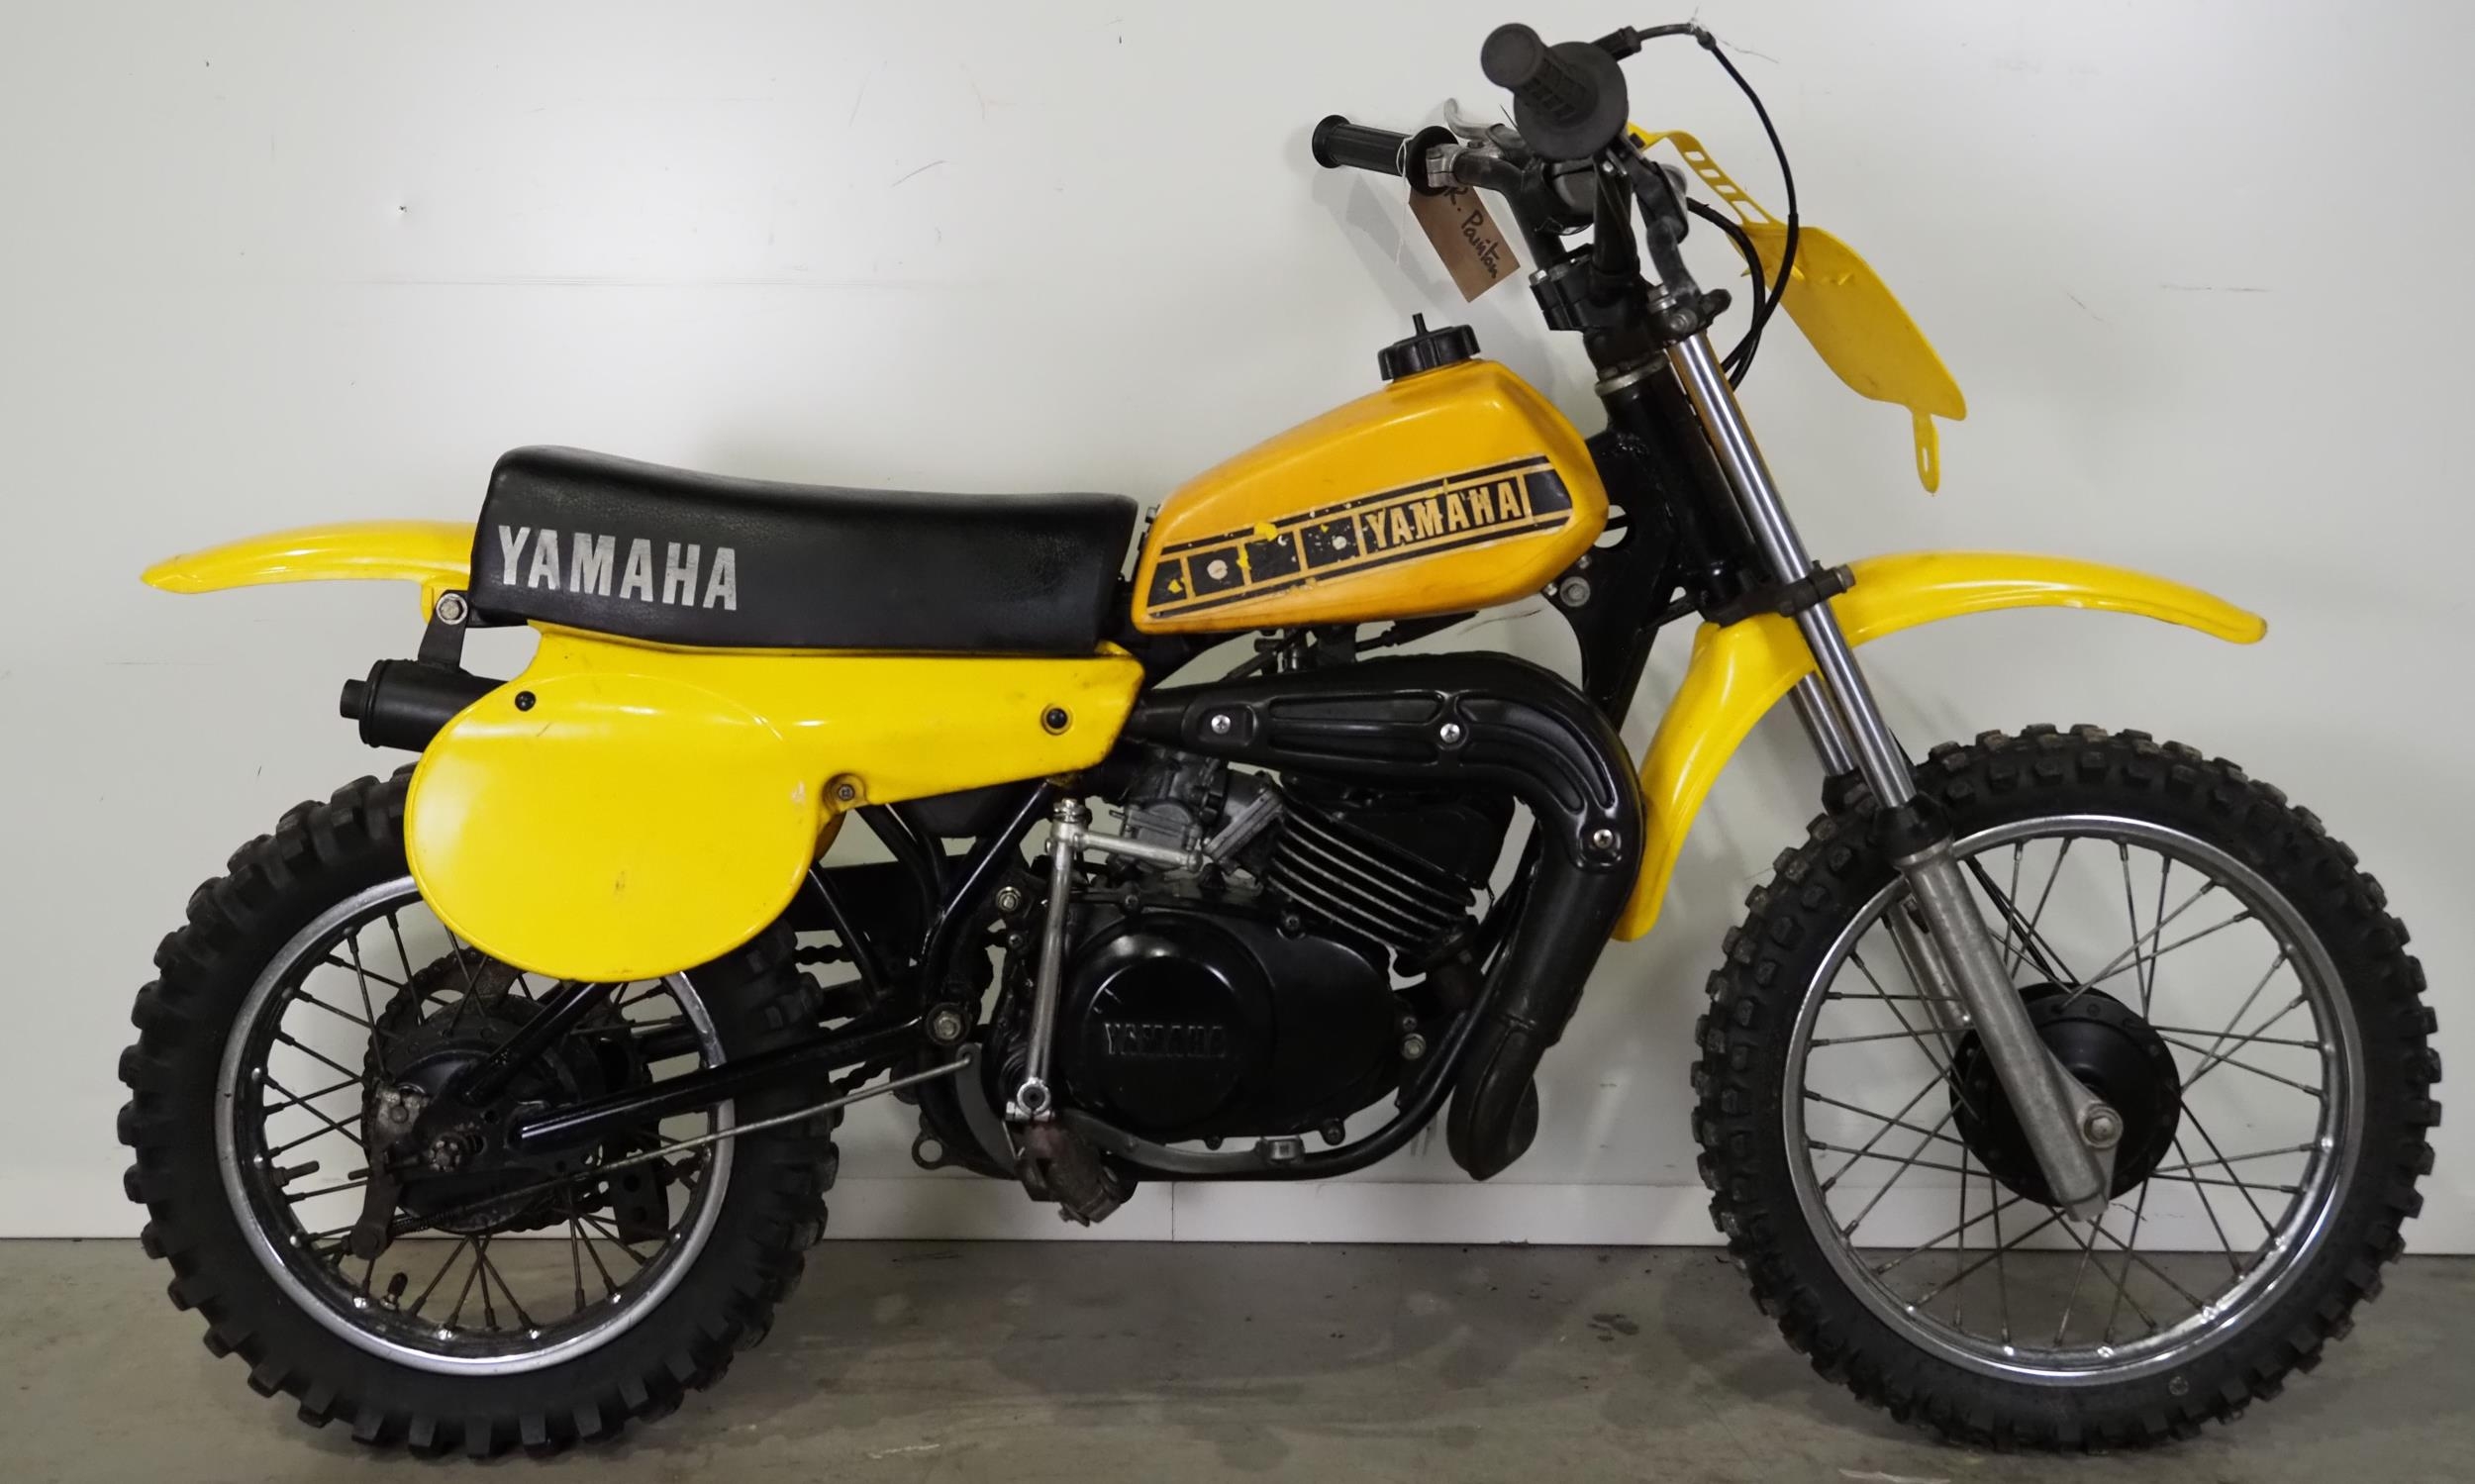 Yamaha YZ 50 motorcycle. Frame No- 3R0-003975 Runs and rides, came from a collection in Florida - Image 2 of 7